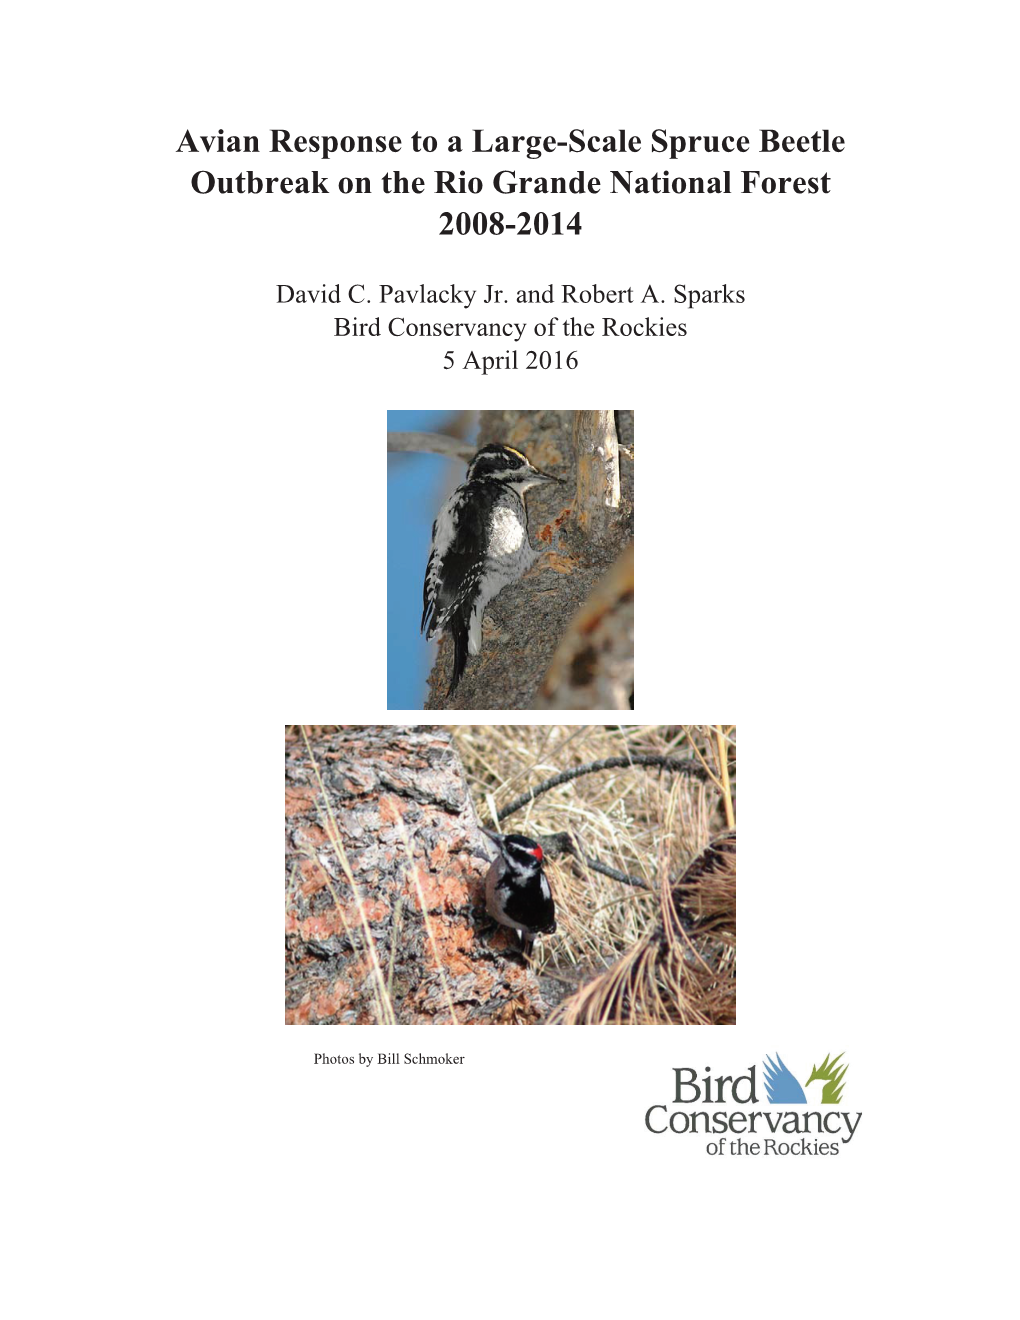 Avian Response to a Large-Scale Spruce Beetle Outbreak on the Rio Grande National Forest 2008-2014